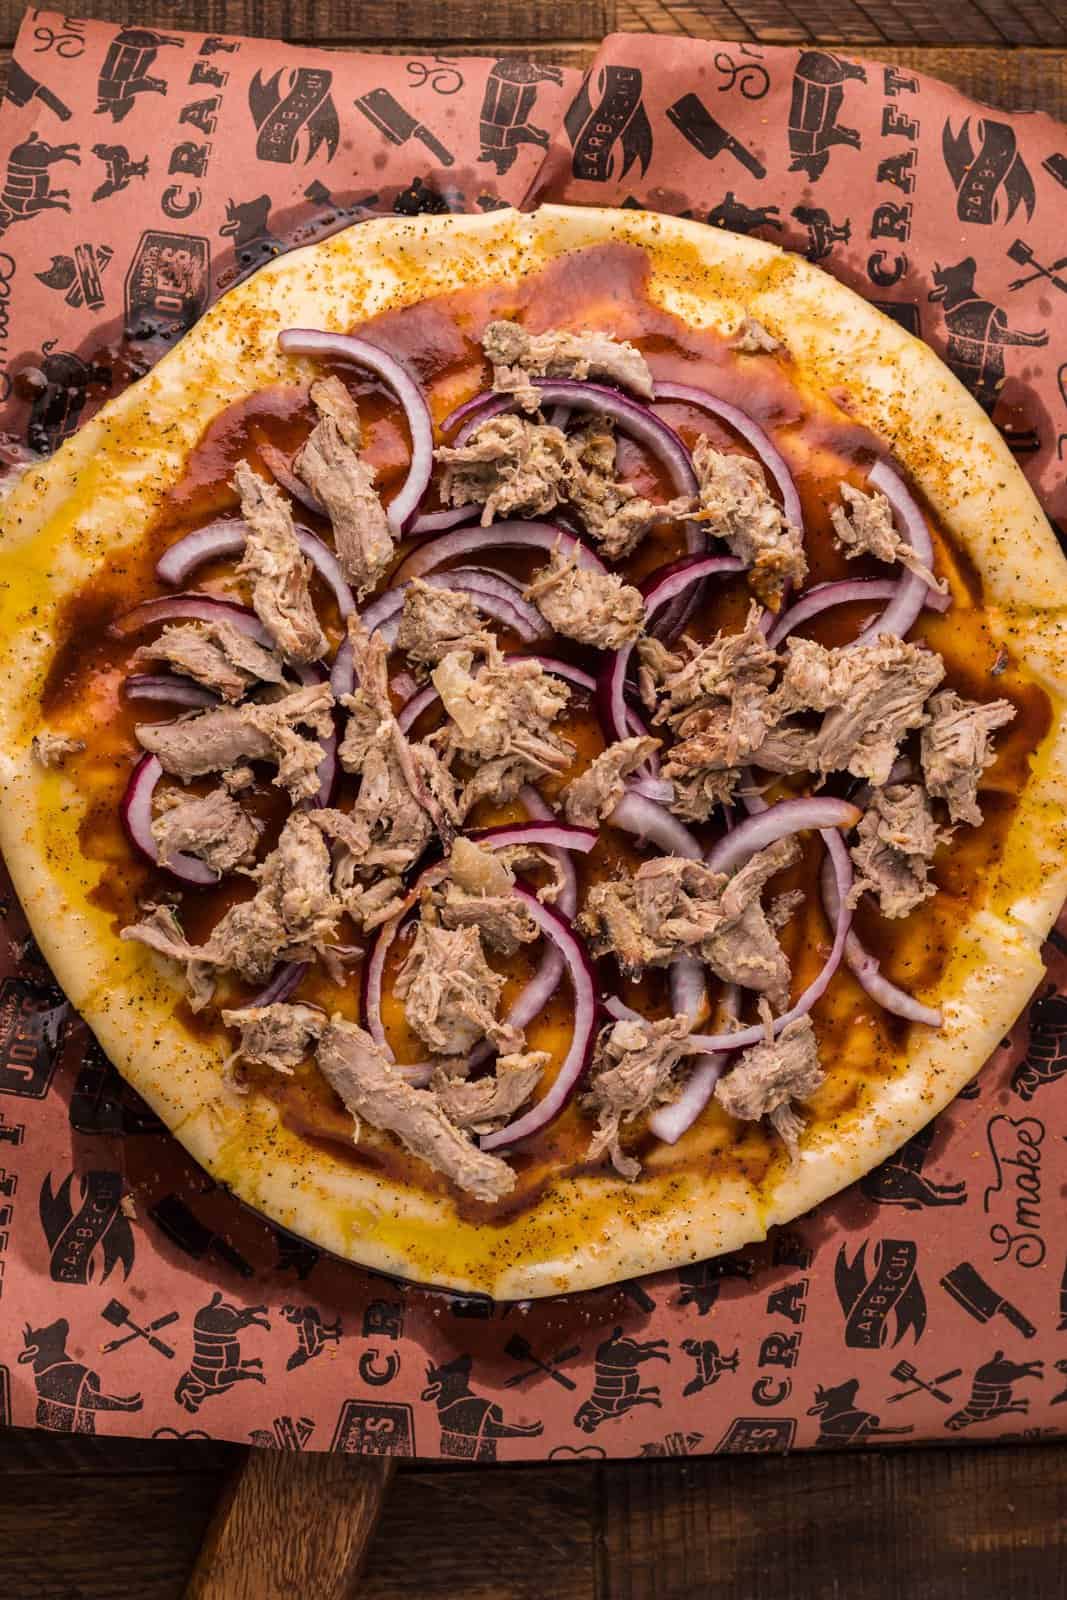 Pulled pork and red onions added to pizza dough.